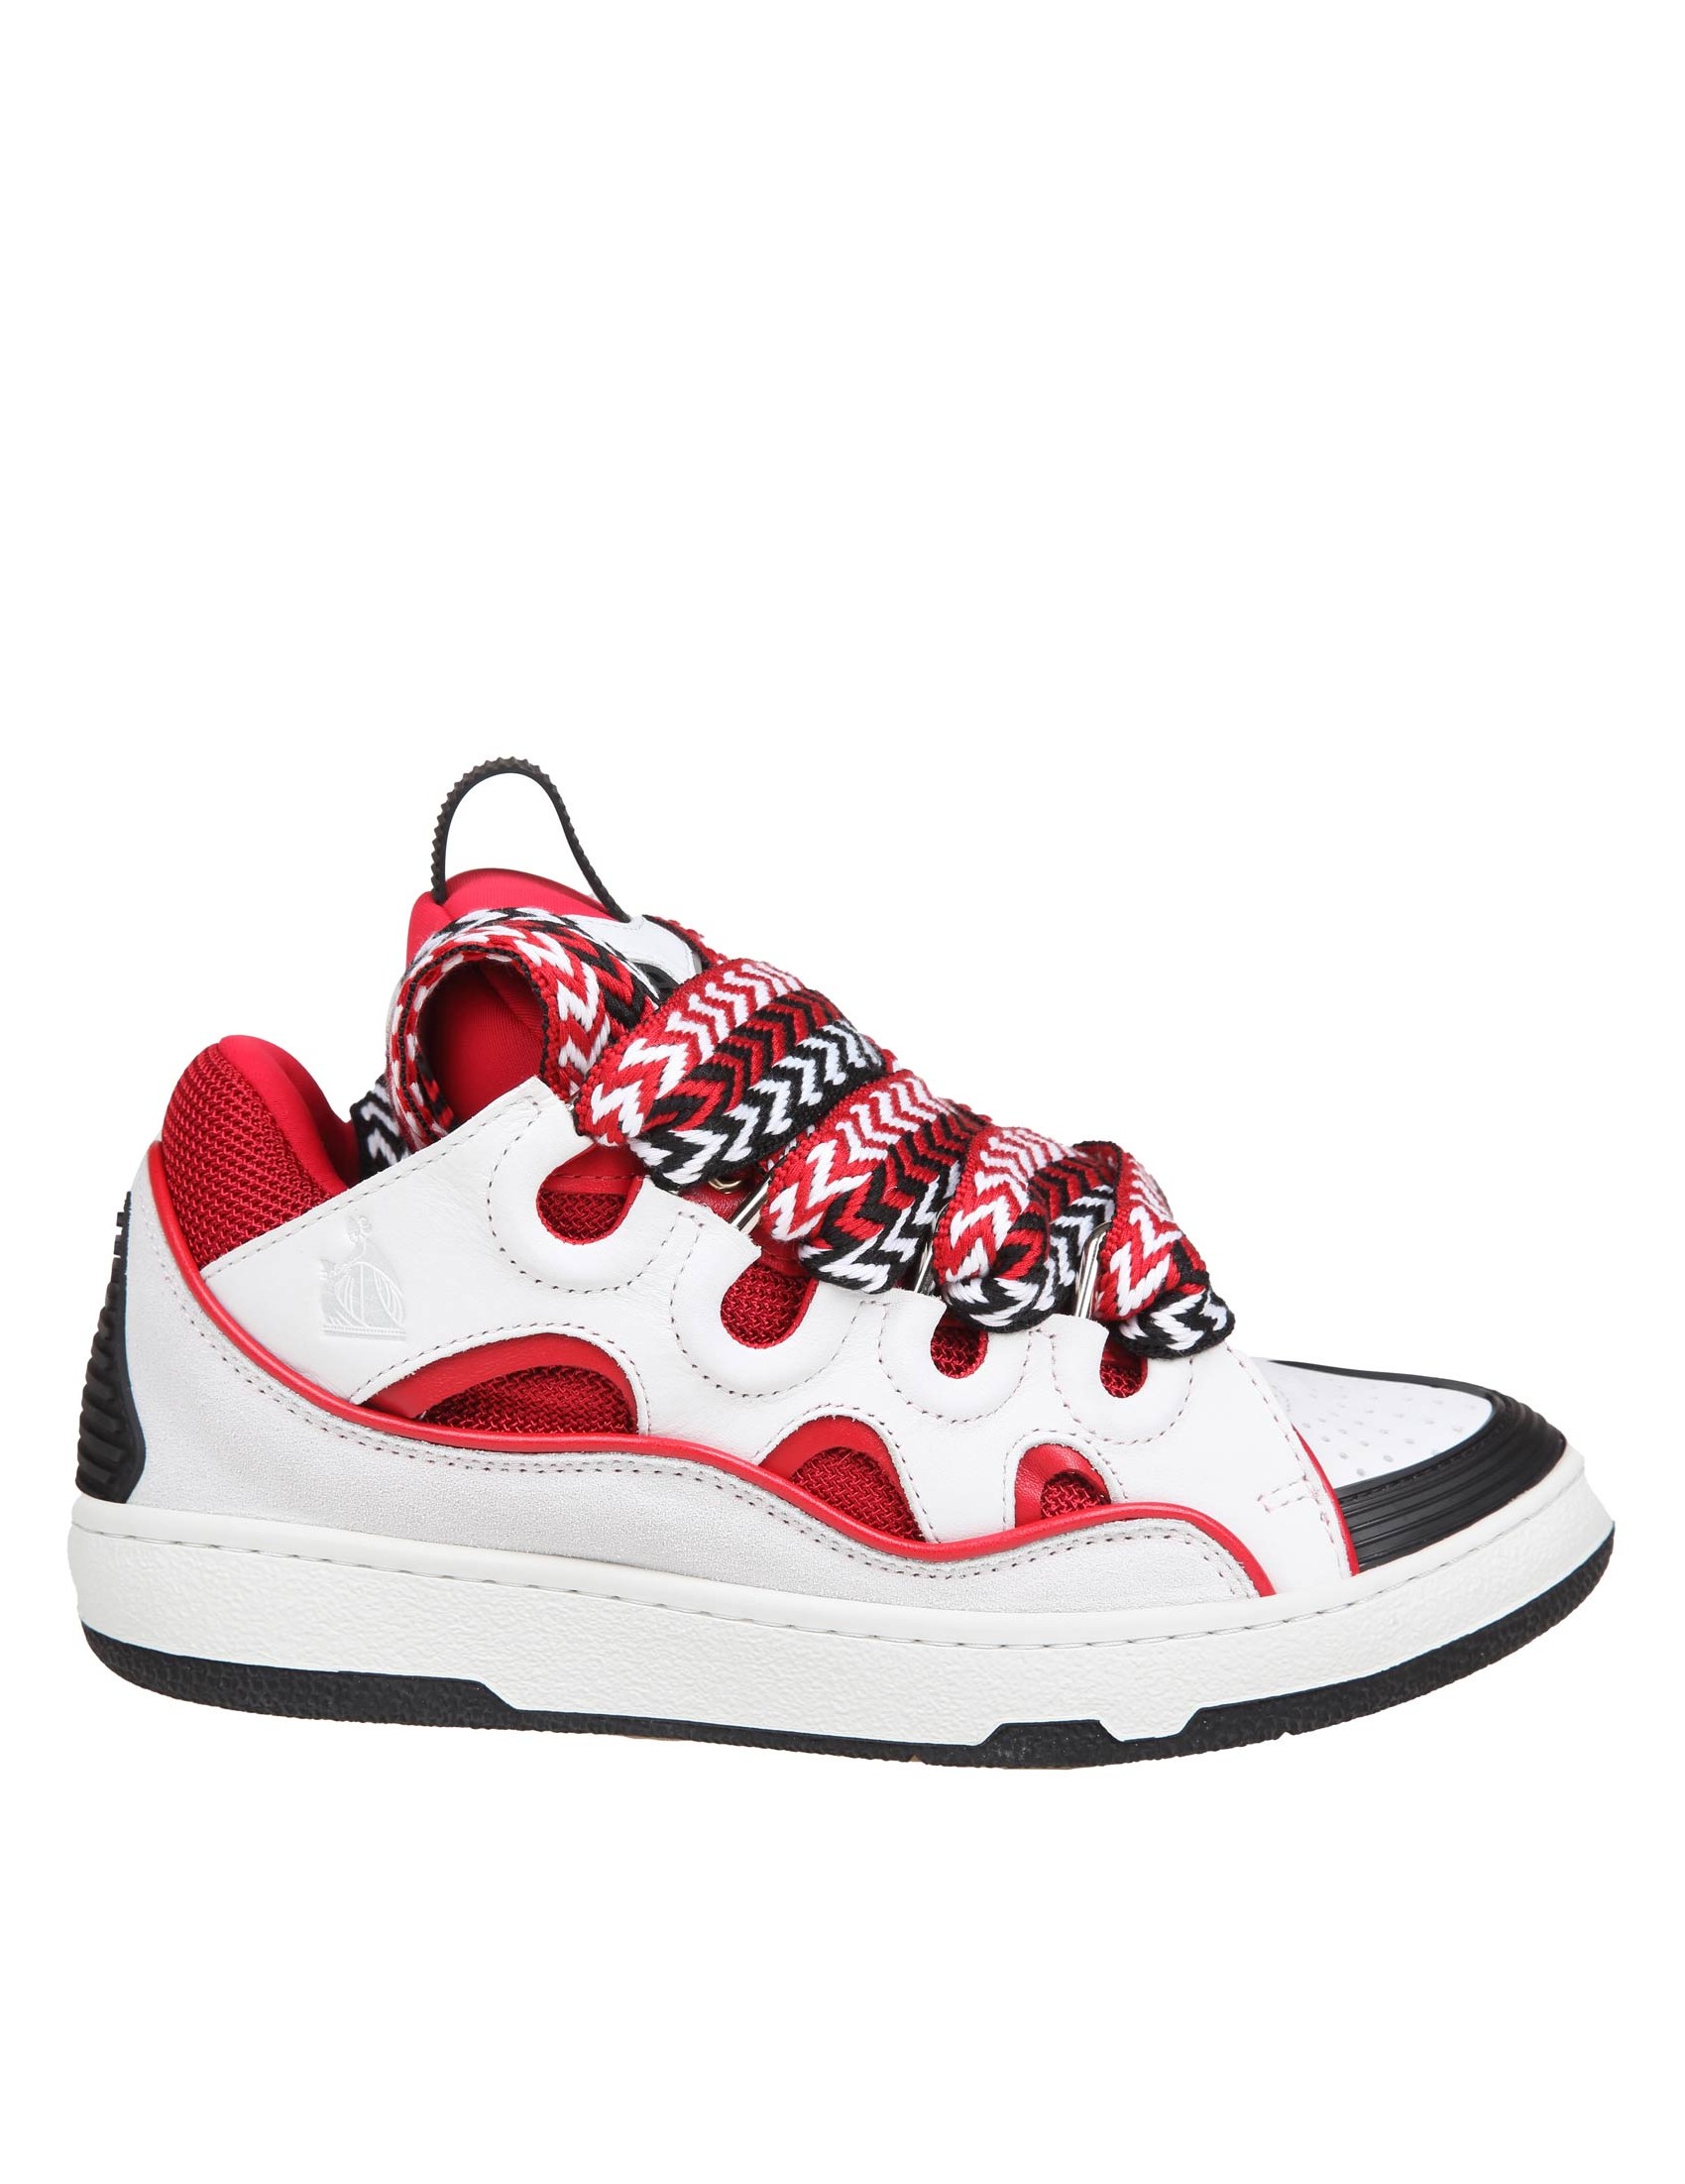 LANVIN CURB SNEAKERS LANVIN CURB SNEAKERS IN WHITE AND RED LEATHER AND SUEDE